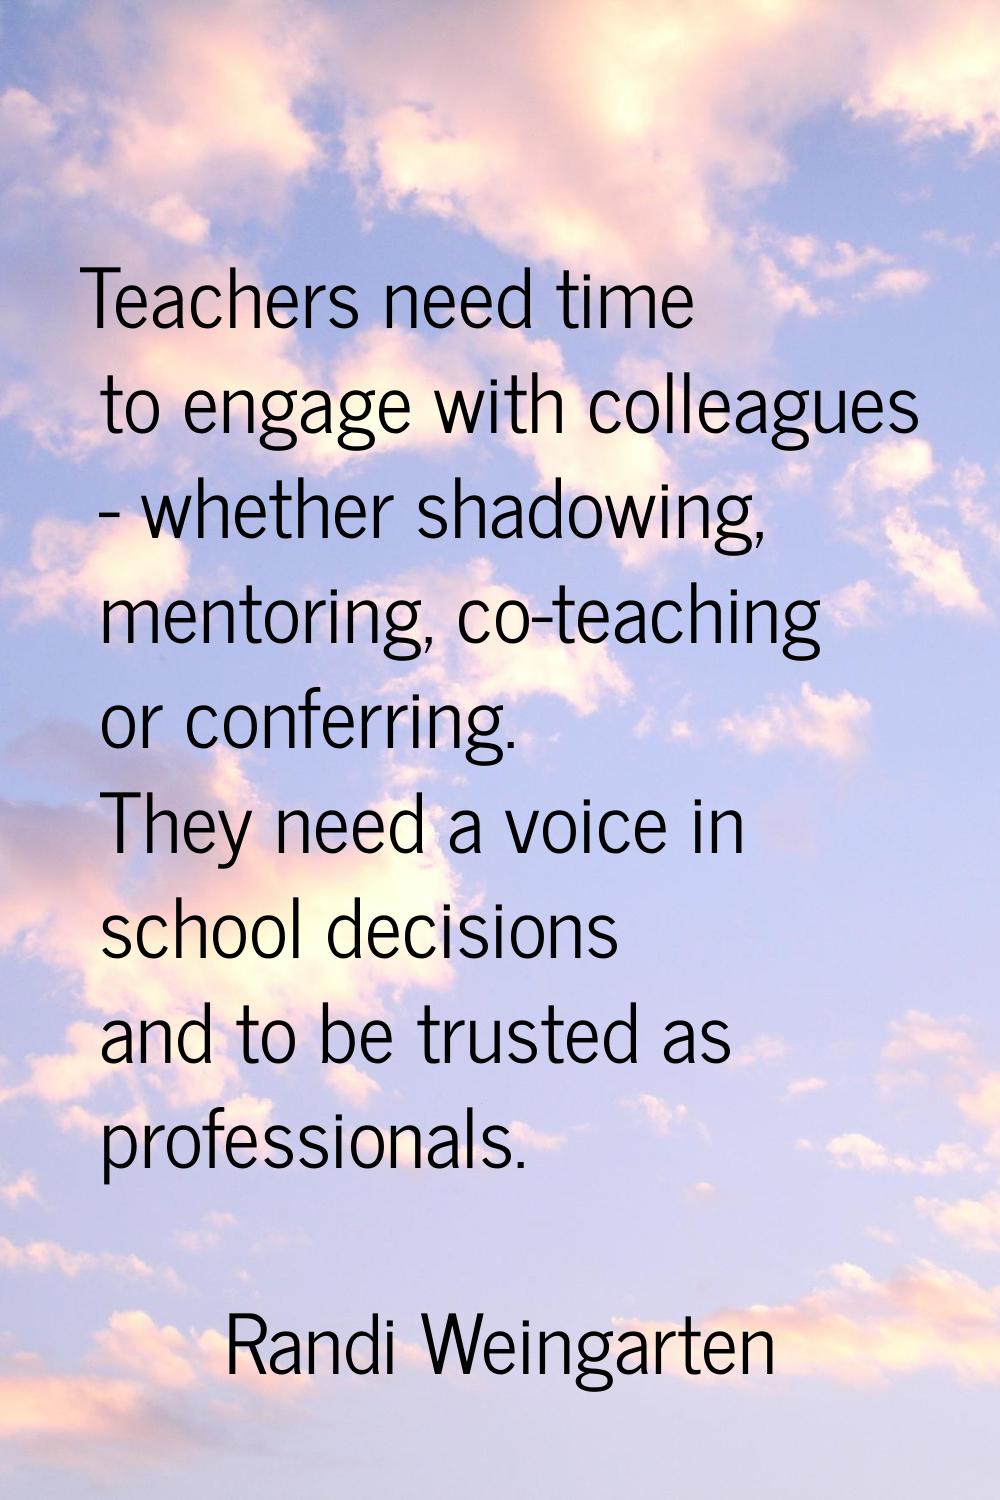 Teachers need time to engage with colleagues - whether shadowing, mentoring, co-teaching or conferr